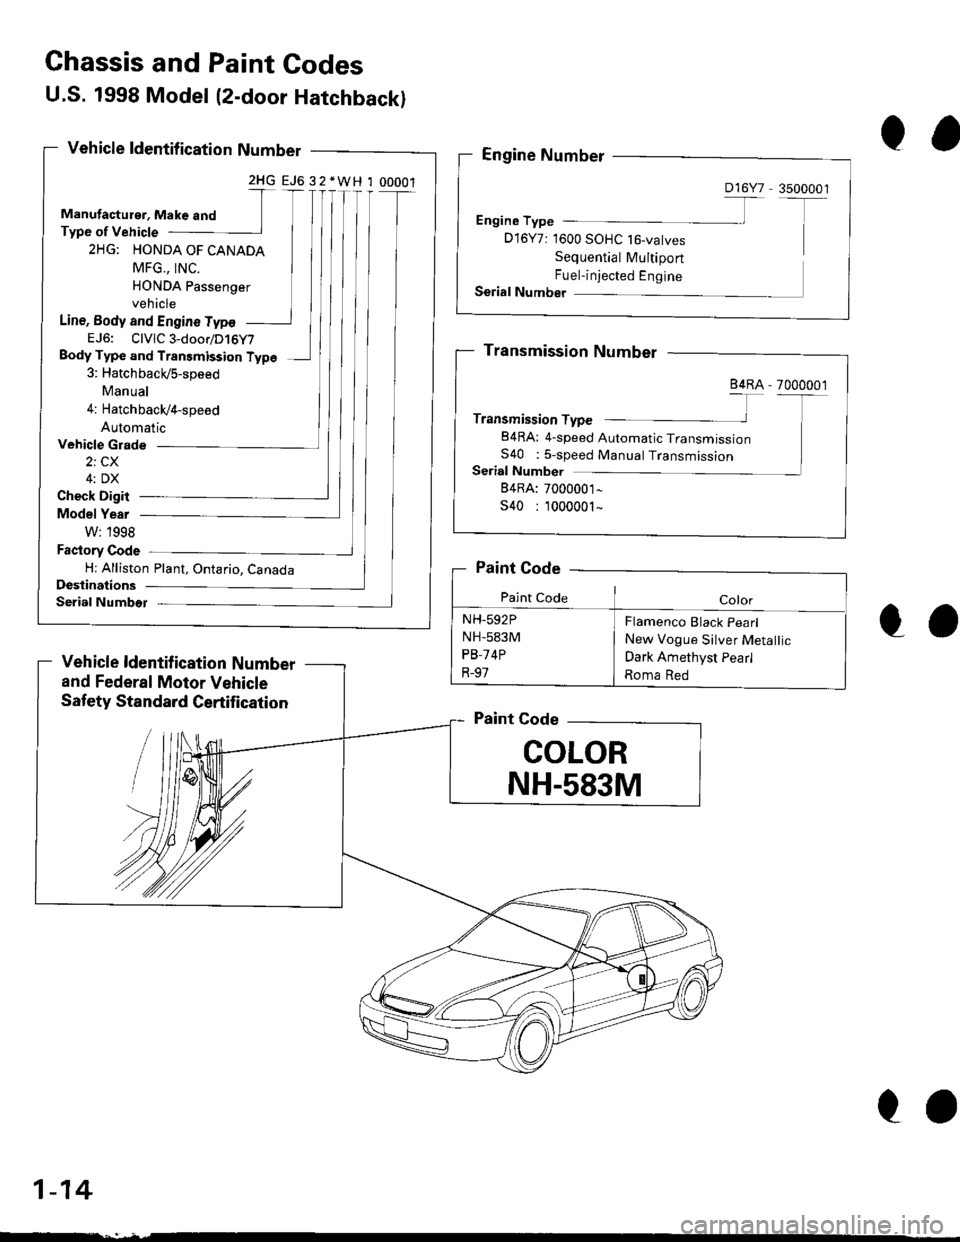 HONDA CIVIC 1999 6.G User Guide Ghassis and Paint Godes
Vehicle Grade
2i CX
4: DX
Check Digit
Model Year
W: 1998
Factory Code
Hr Alliston Plant, Ontario, CanadaDeslinations
Serial Numbet
Vehicle ldentif ication Number
and Federal Mo